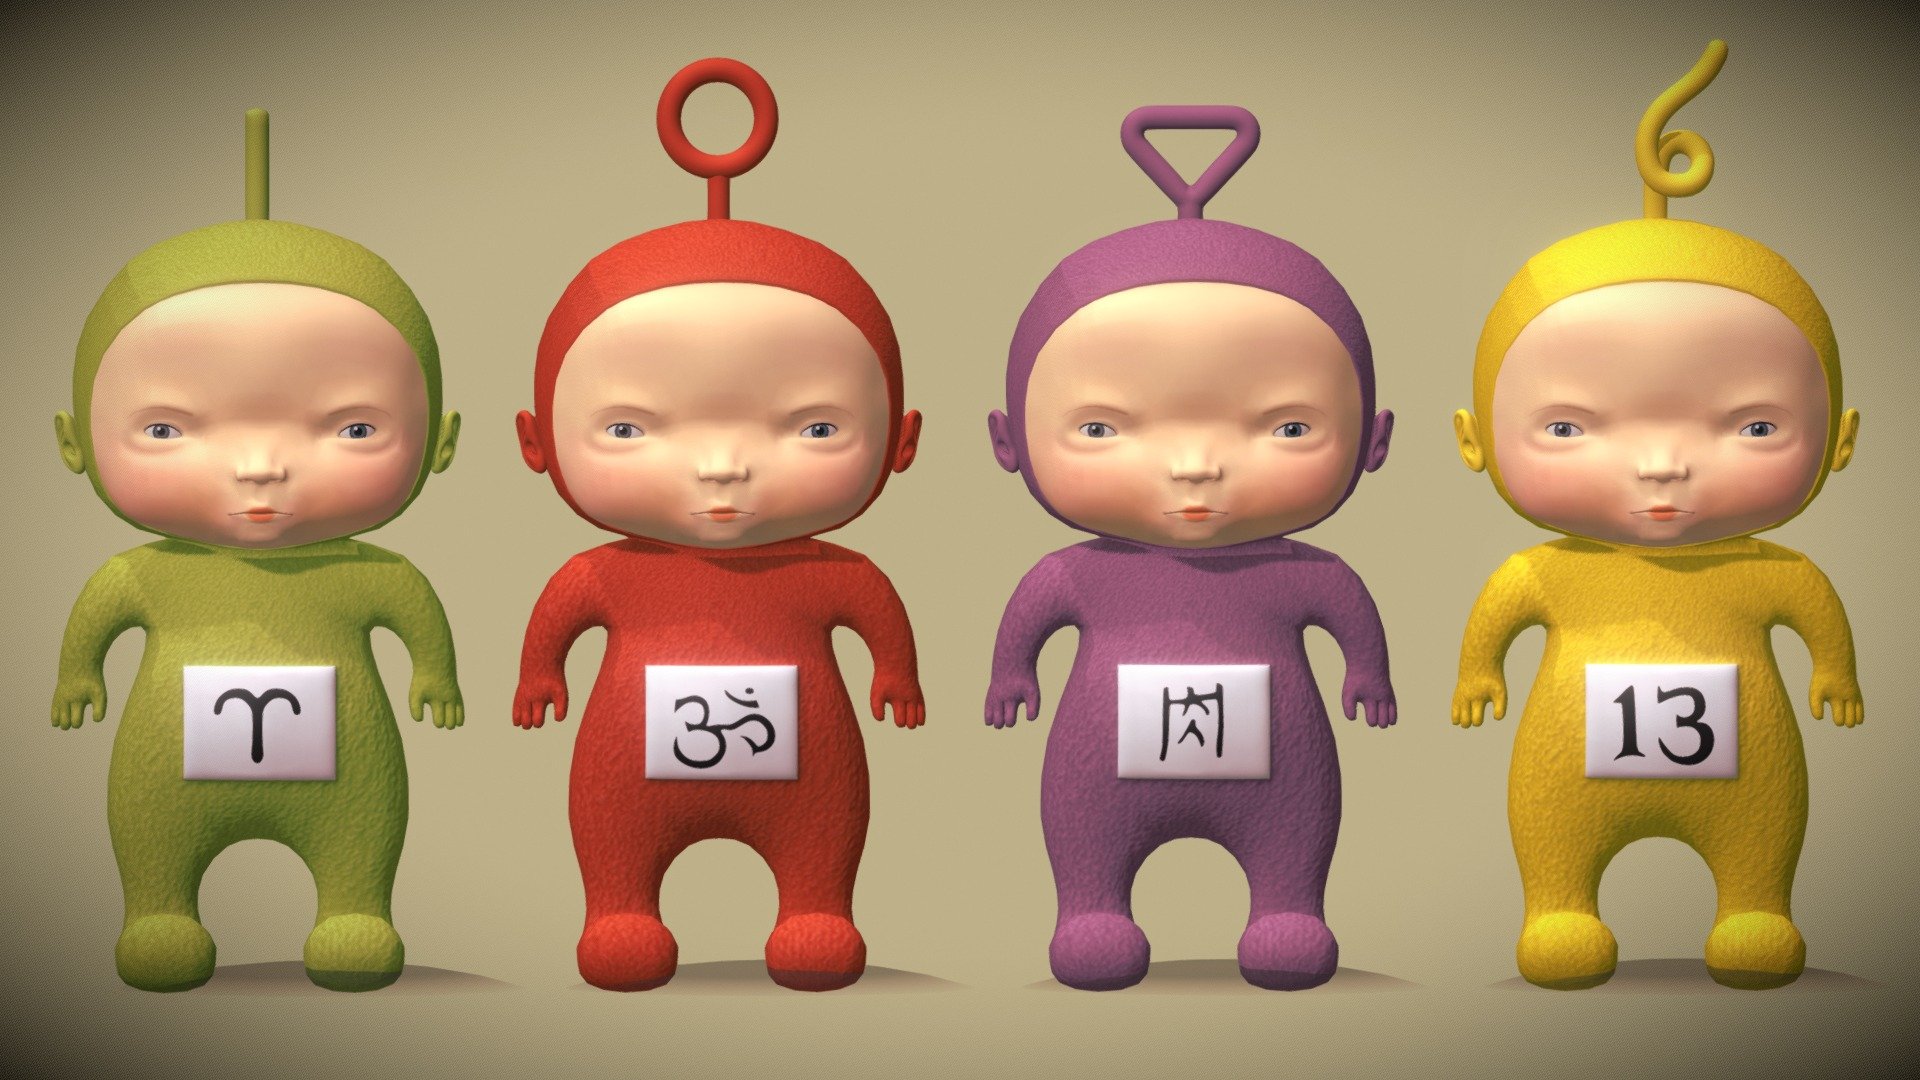 This model takes inspiration on the surreal version of the Teletubbies from artist Mark Ryden 



Here from left to right are
Dipsy, Po, Tinky Winky and Laa-Laa.
I modeled them in blender and painted the textures with the help of photoshop - Mark Ryden Tubbies - 3D model by Ginger L.v.A (@gingerlva) 3d model